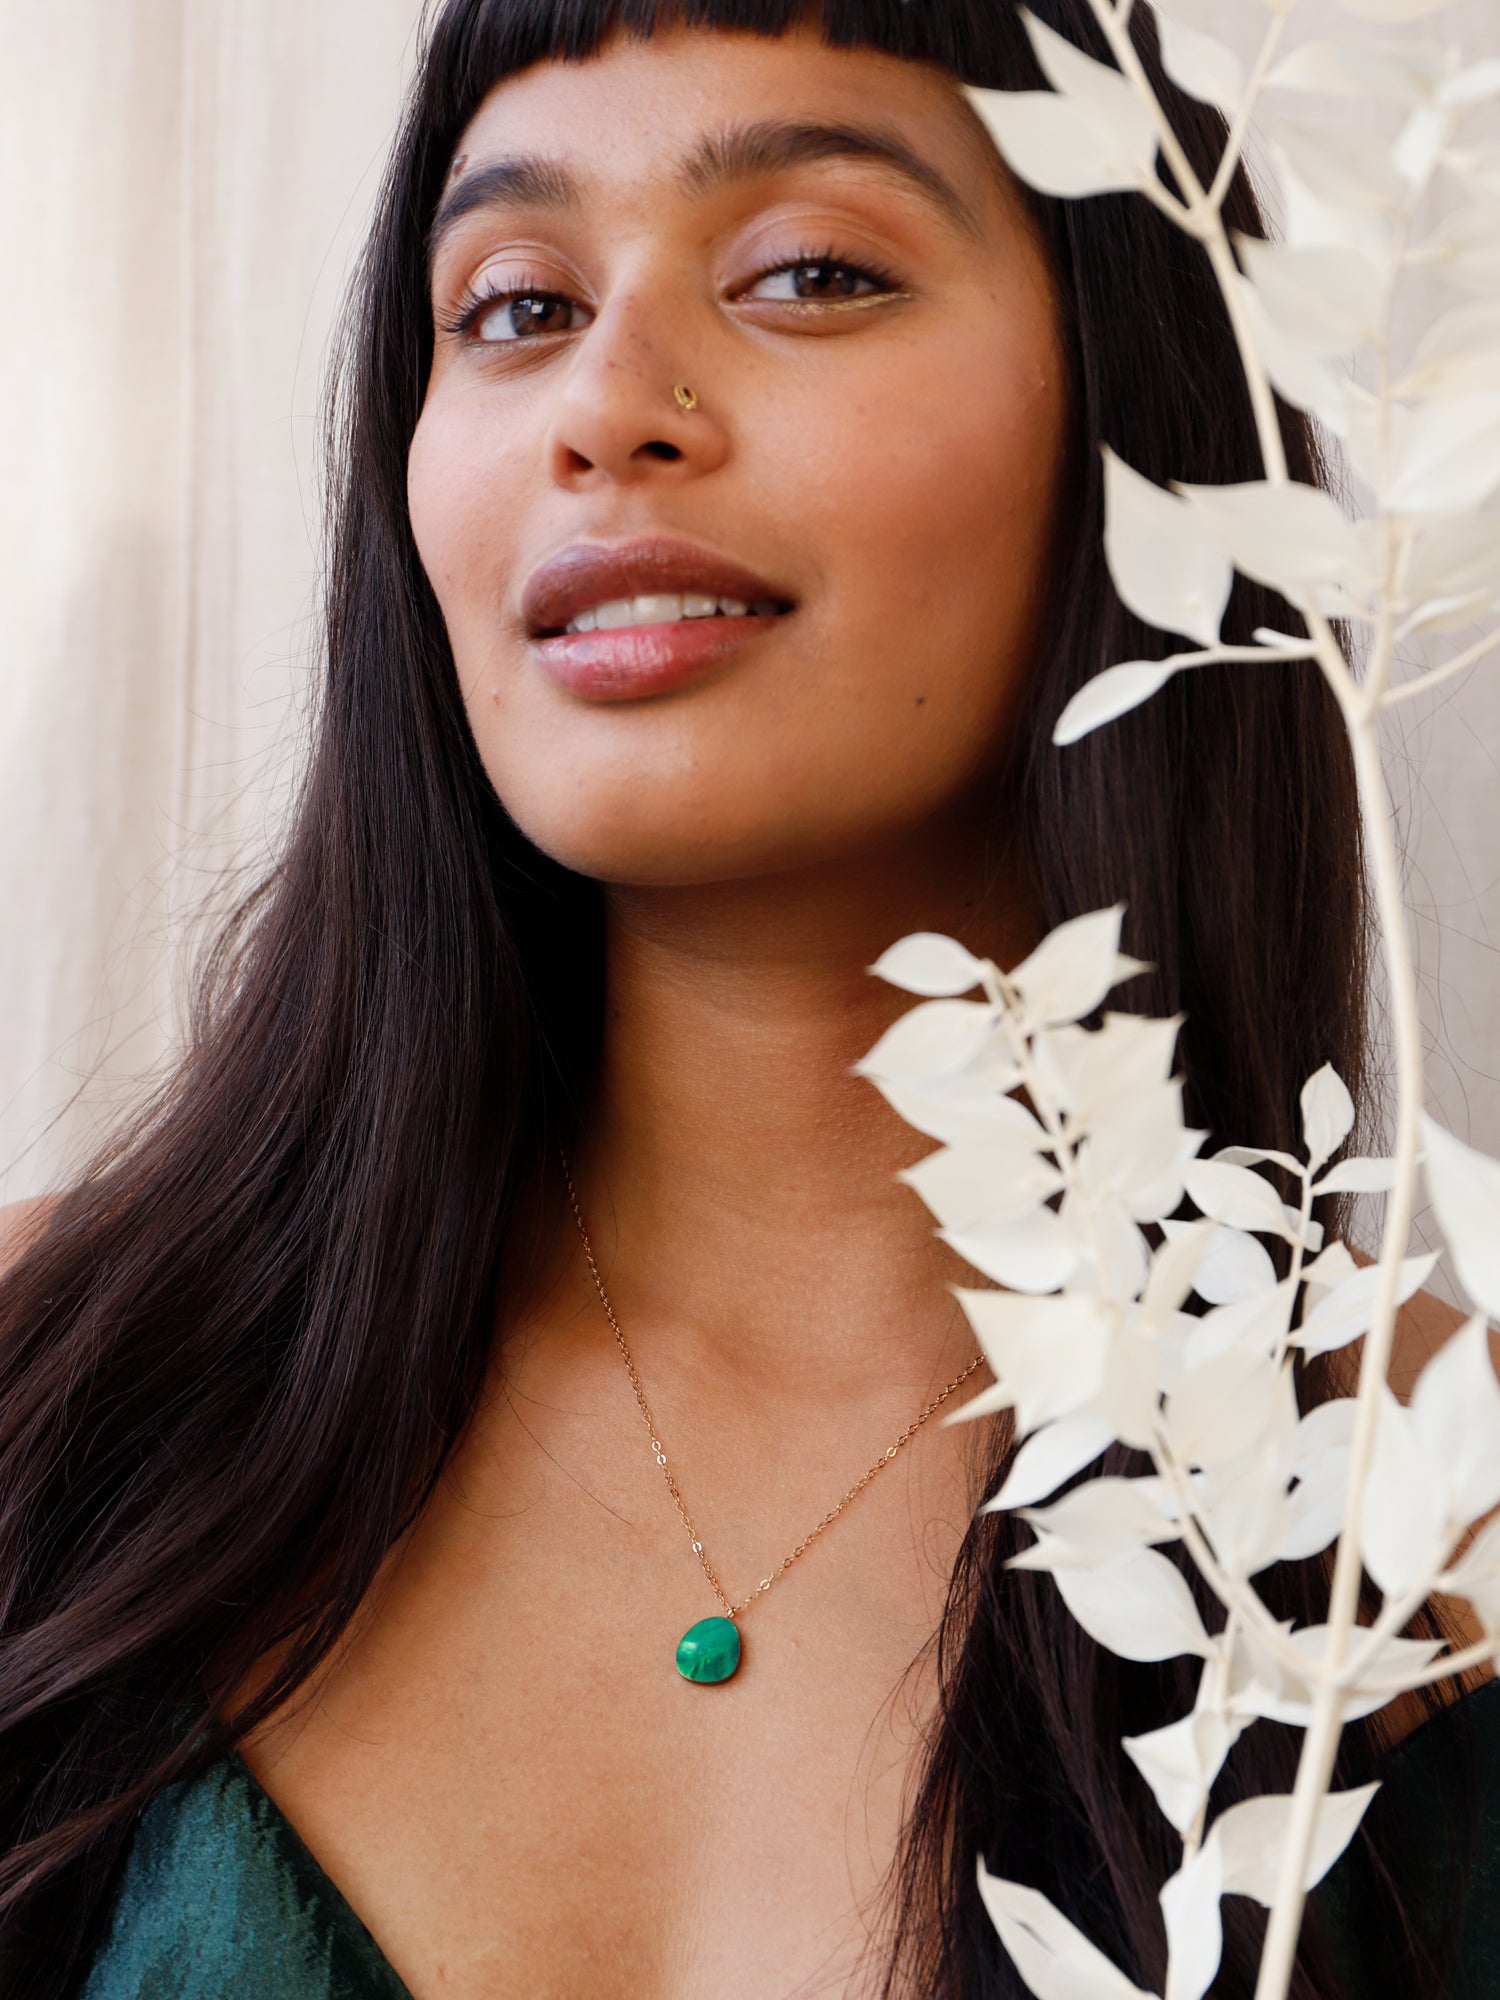 Beatrice Necklace in Emerald. Simple abstract pendant featuring emerald mother of pearl veneer and a 14k gold-filled chain. Handmade in the UK by Wolf & Moon.